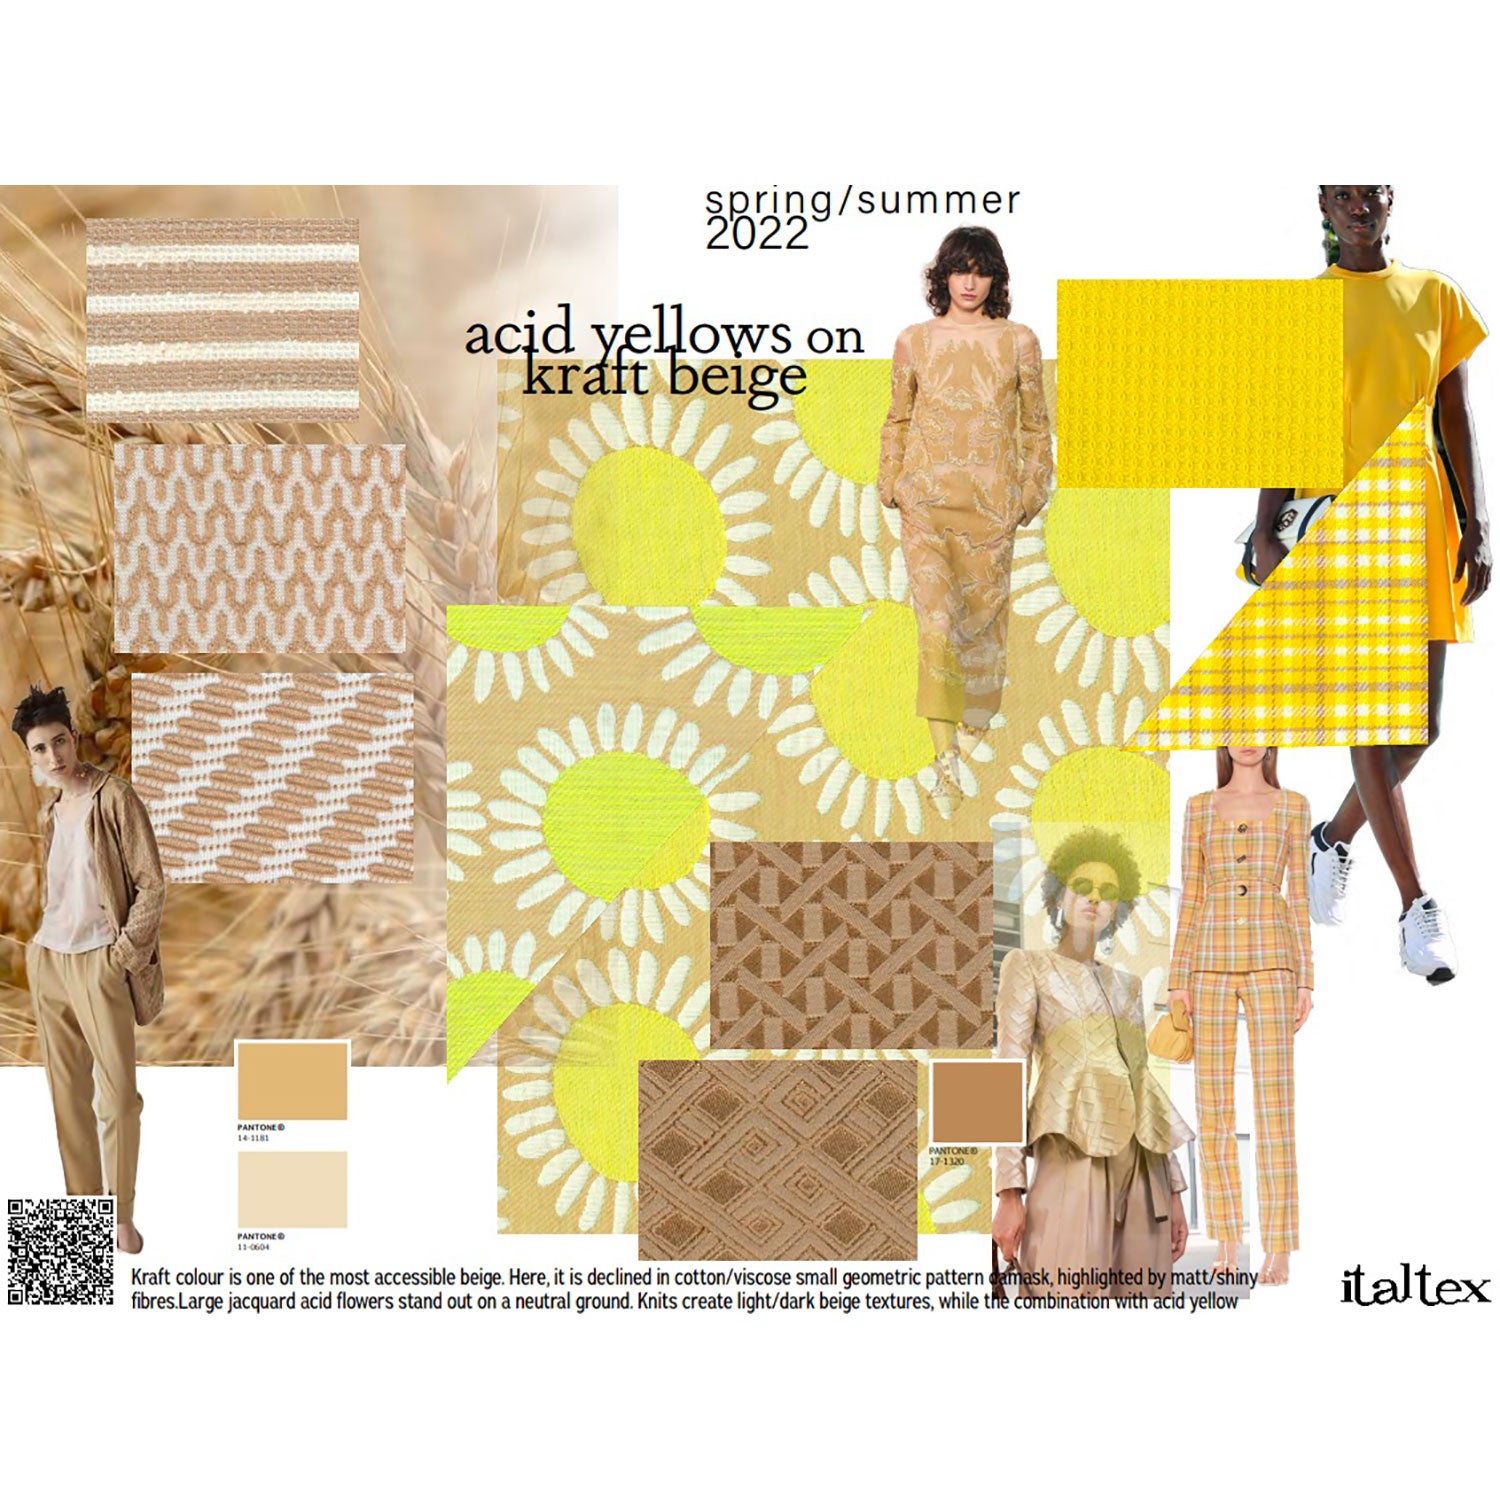 Women's wear fabrics: three white/beige knits: an horizontal stripe, a textured diagonal and a fancy small pattern in knits; two geometrical jacquards for dresses, suits or jackets; Jacquard big marguerite flowers on a beige ground, a textured yellow ribbed fabric and a yellow, white and grey check for jackets or dresses